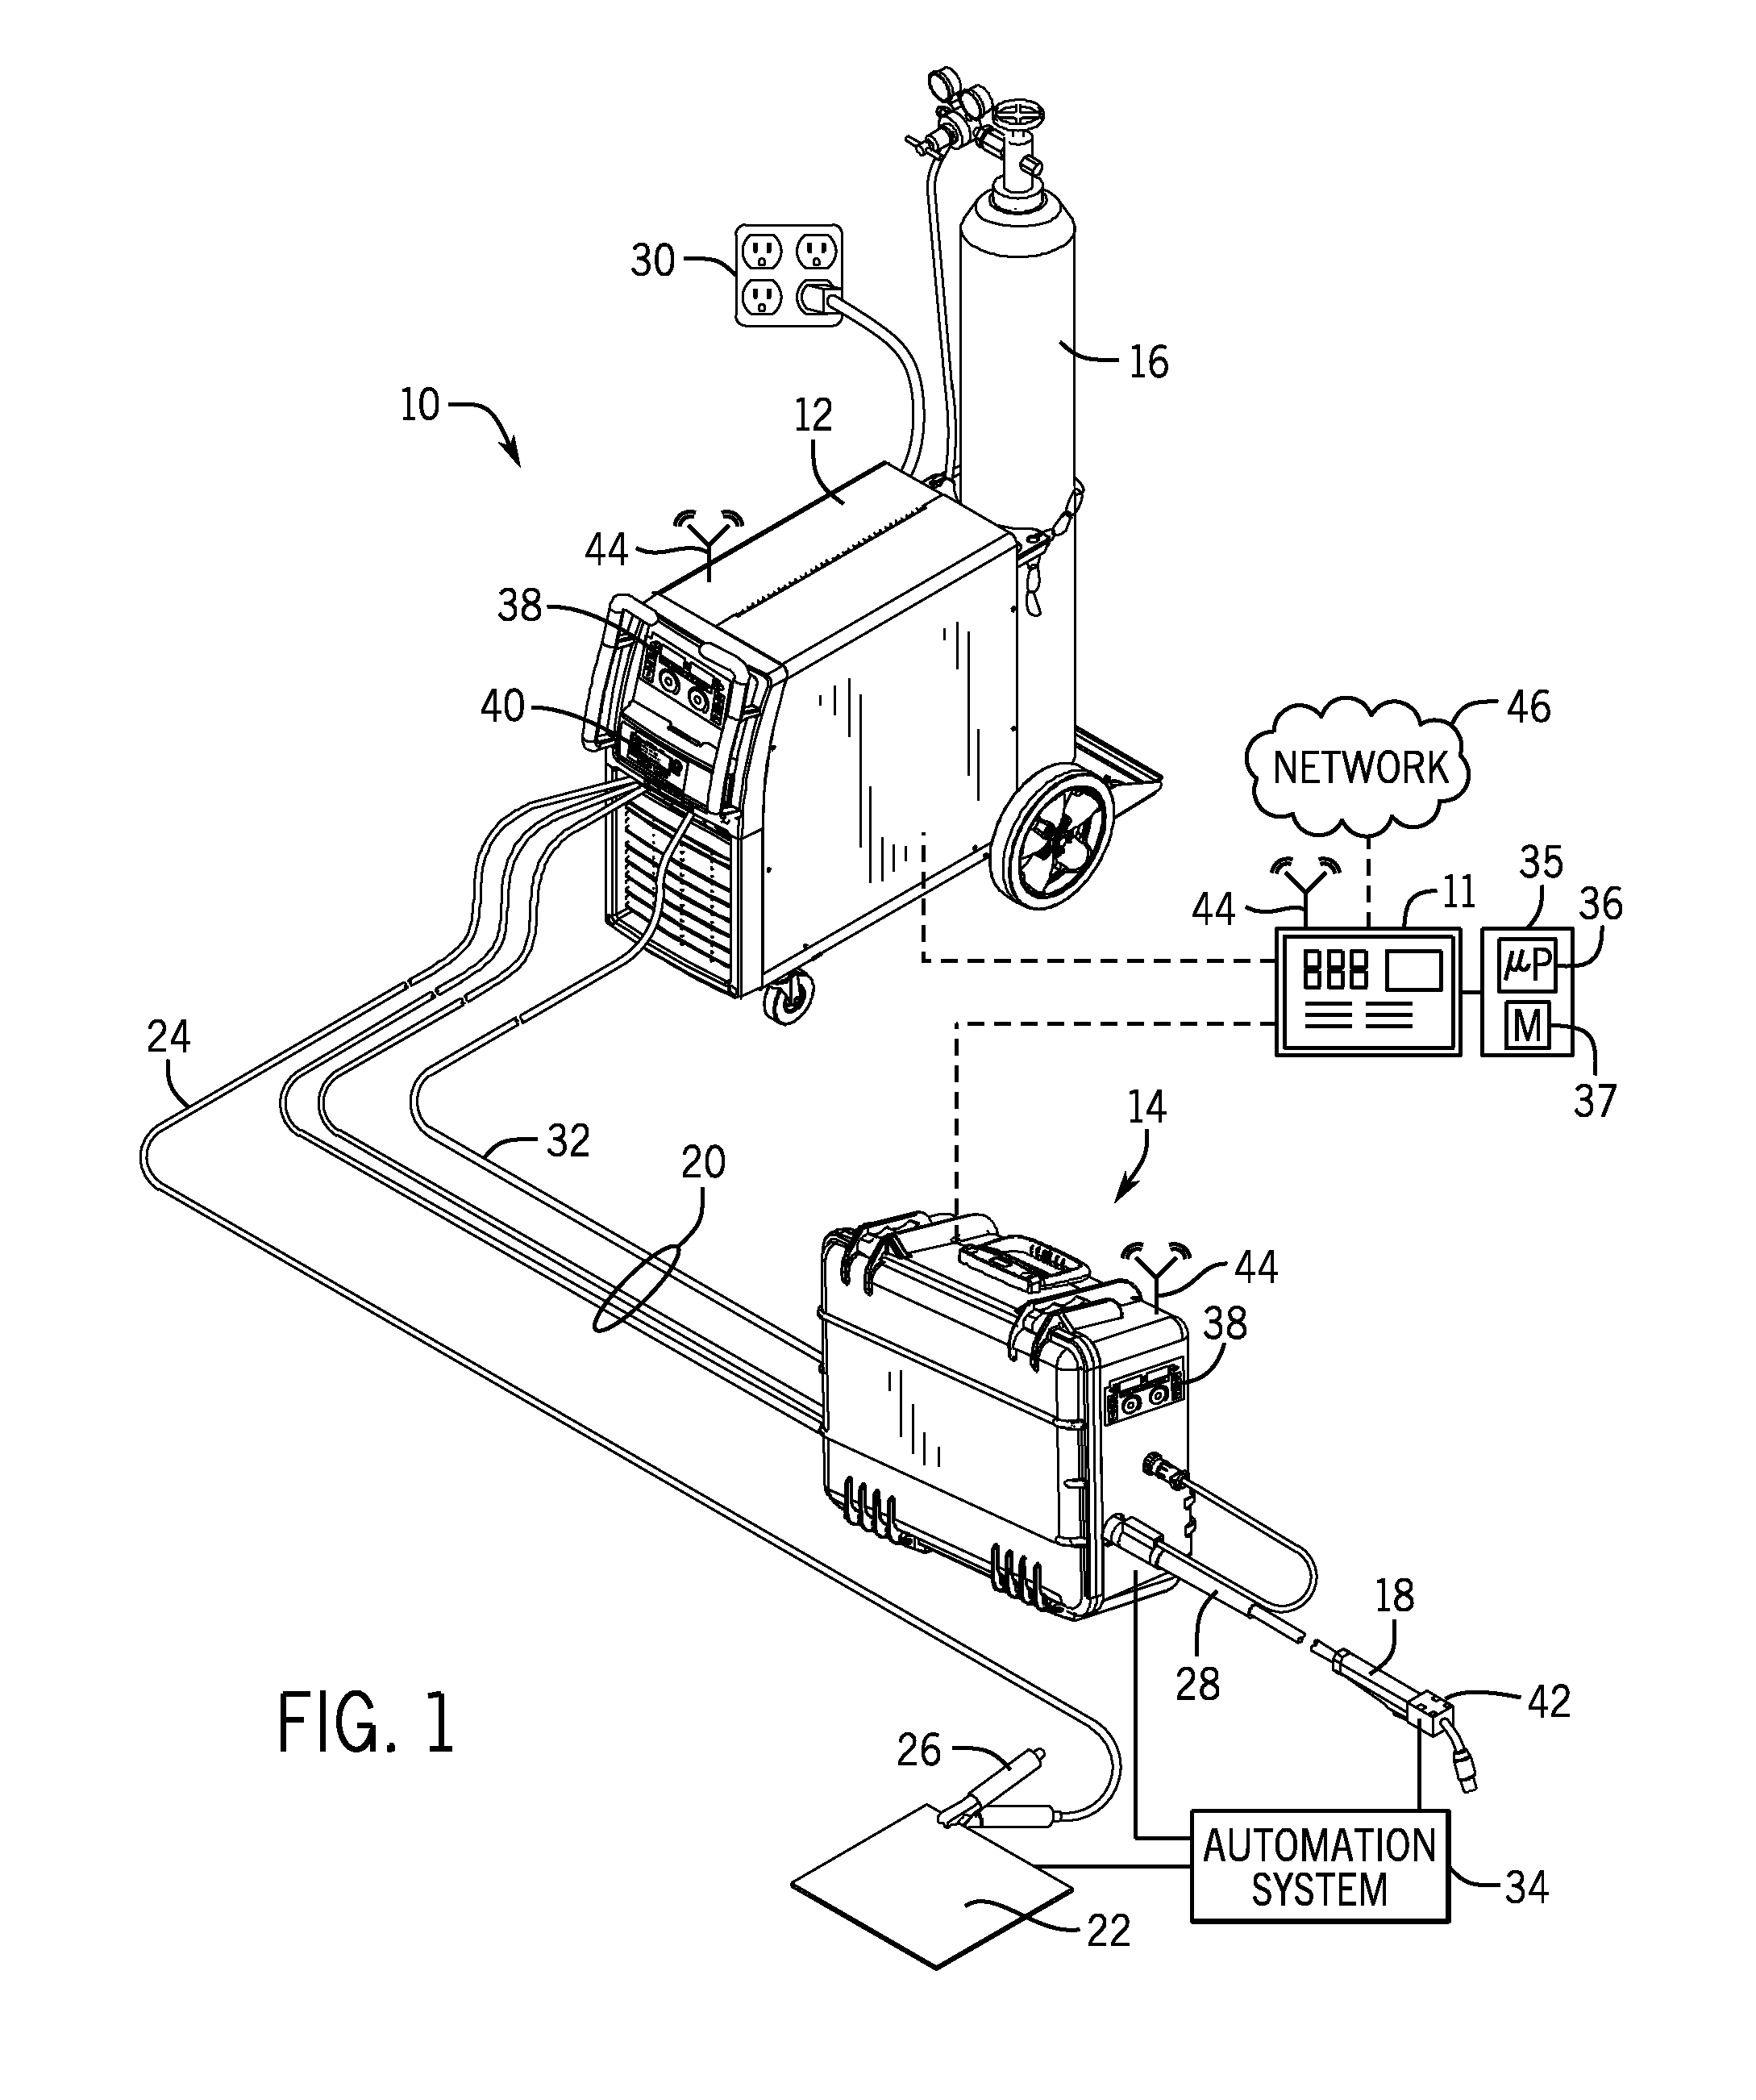 System and method for selecting weld parameters